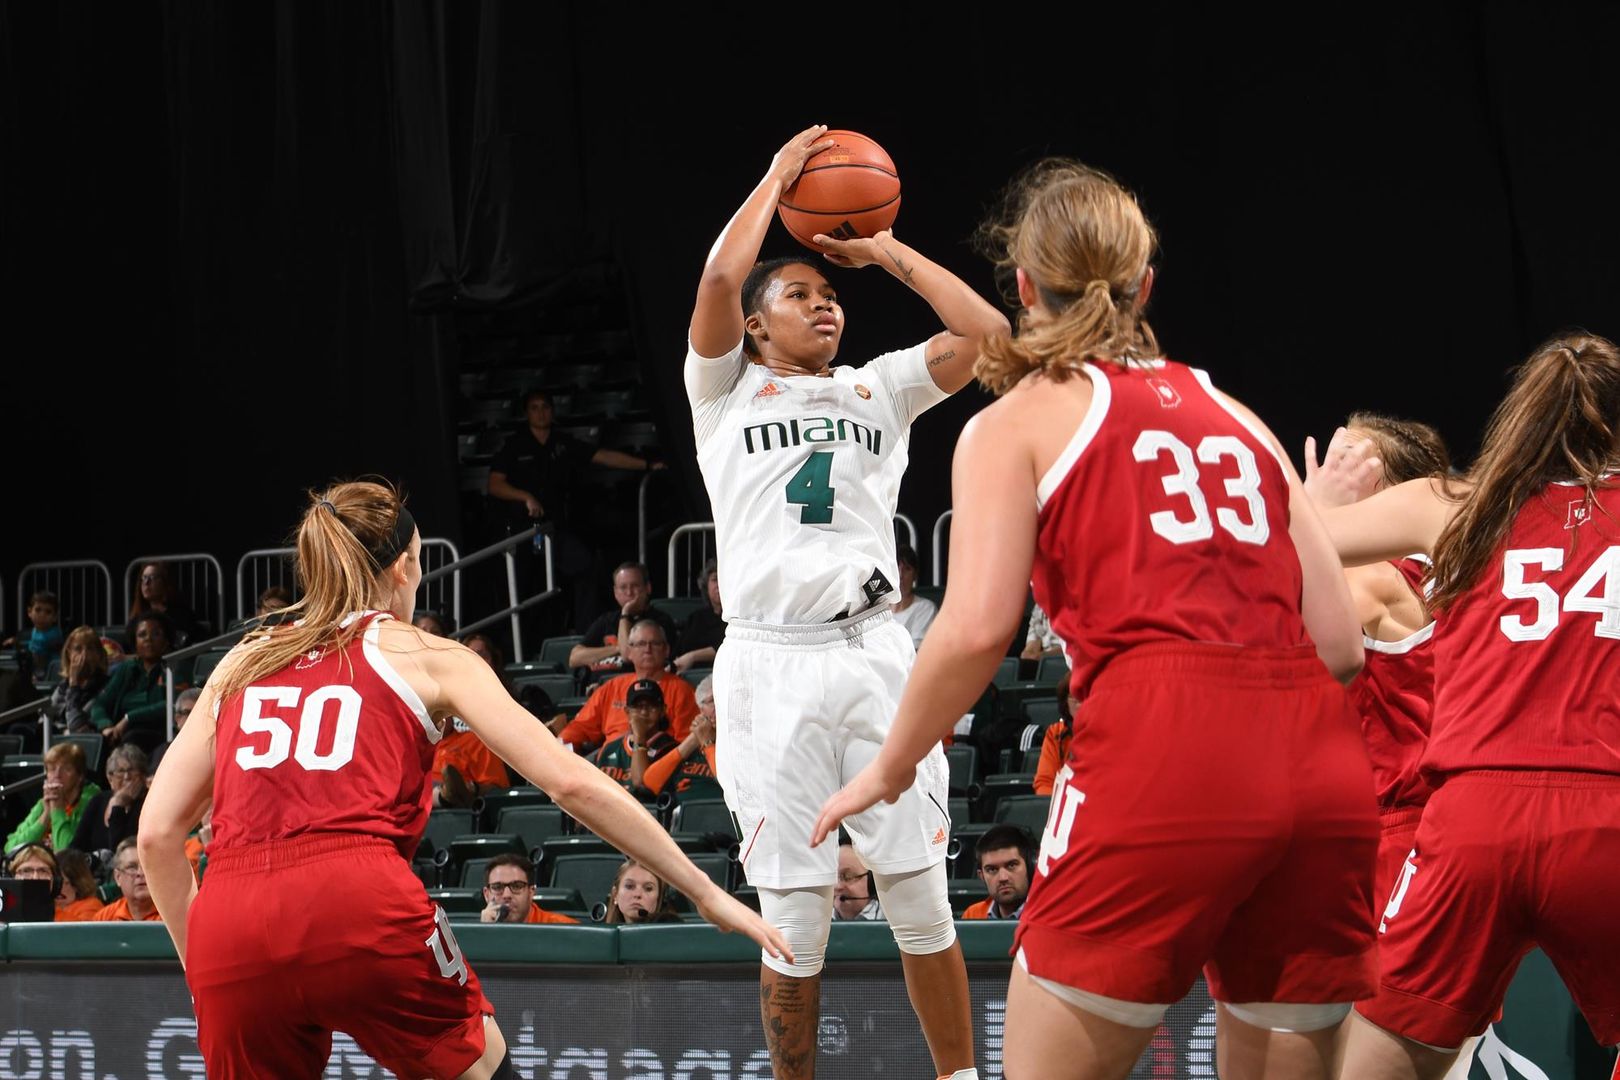 Canes Fall to Indiana in the Big Ten/ACC Challenge